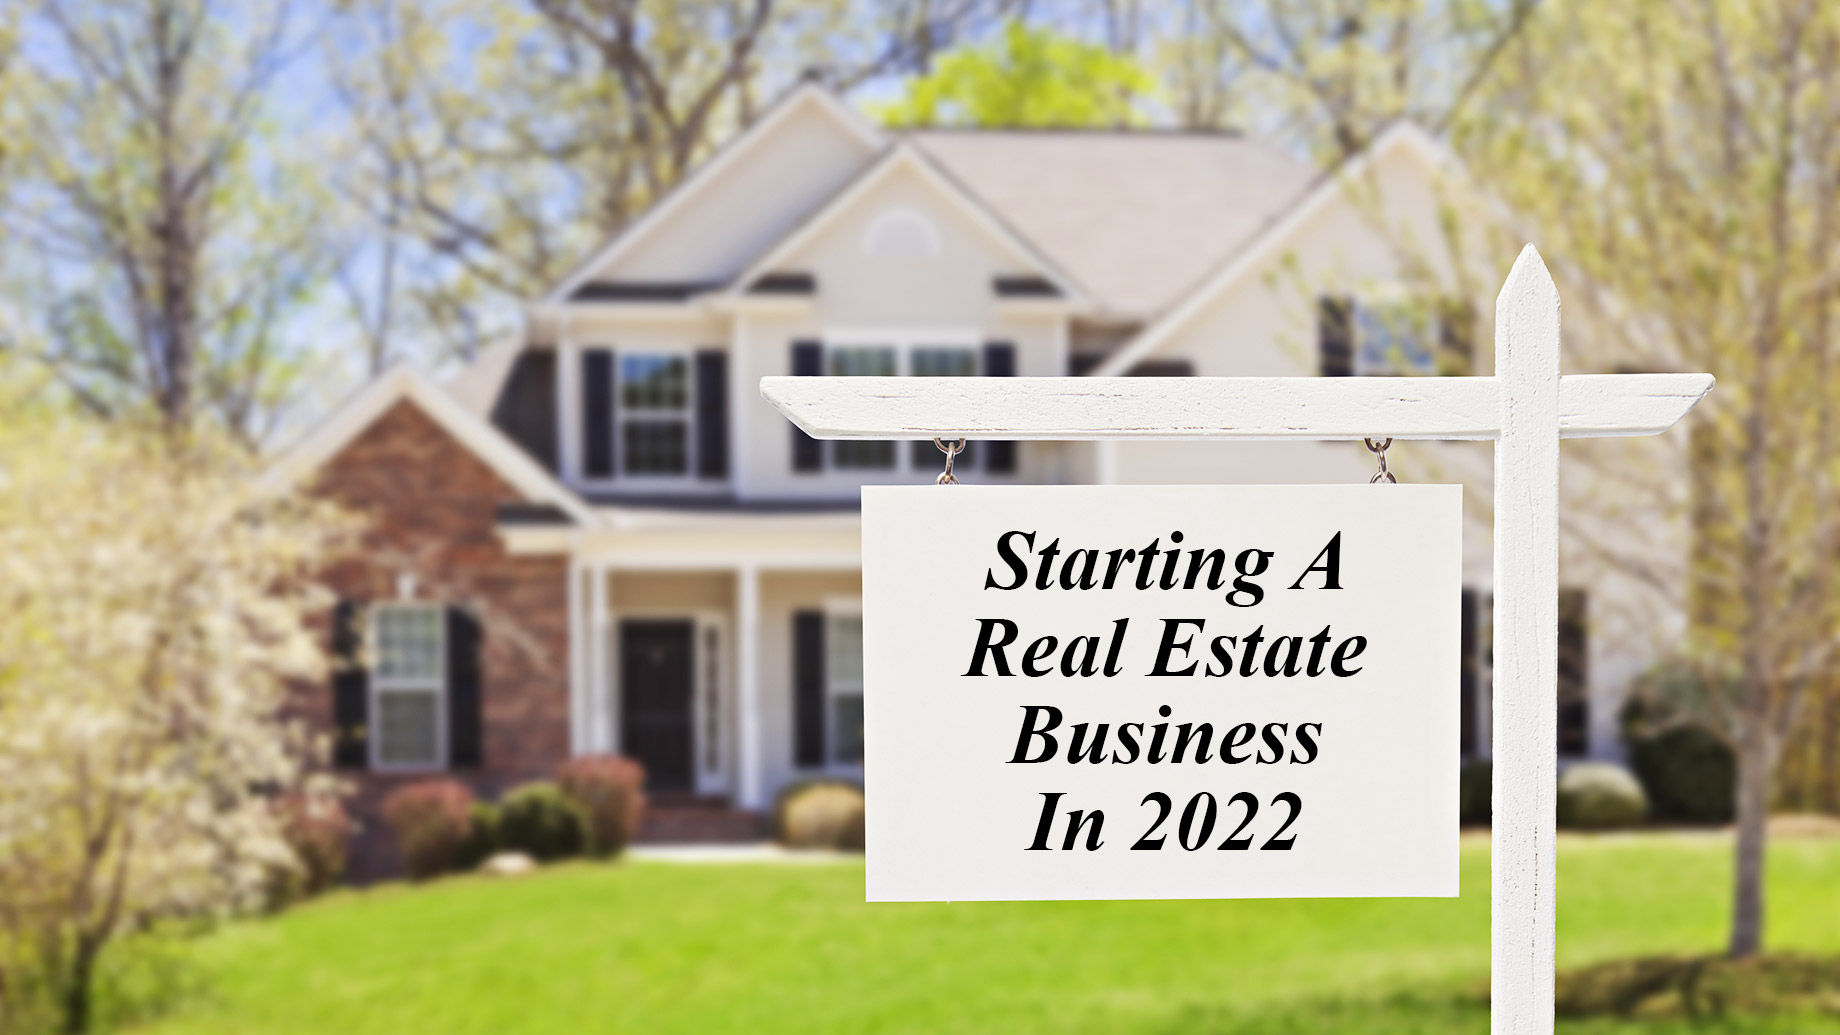 Starting A Real Estate Business In 2022